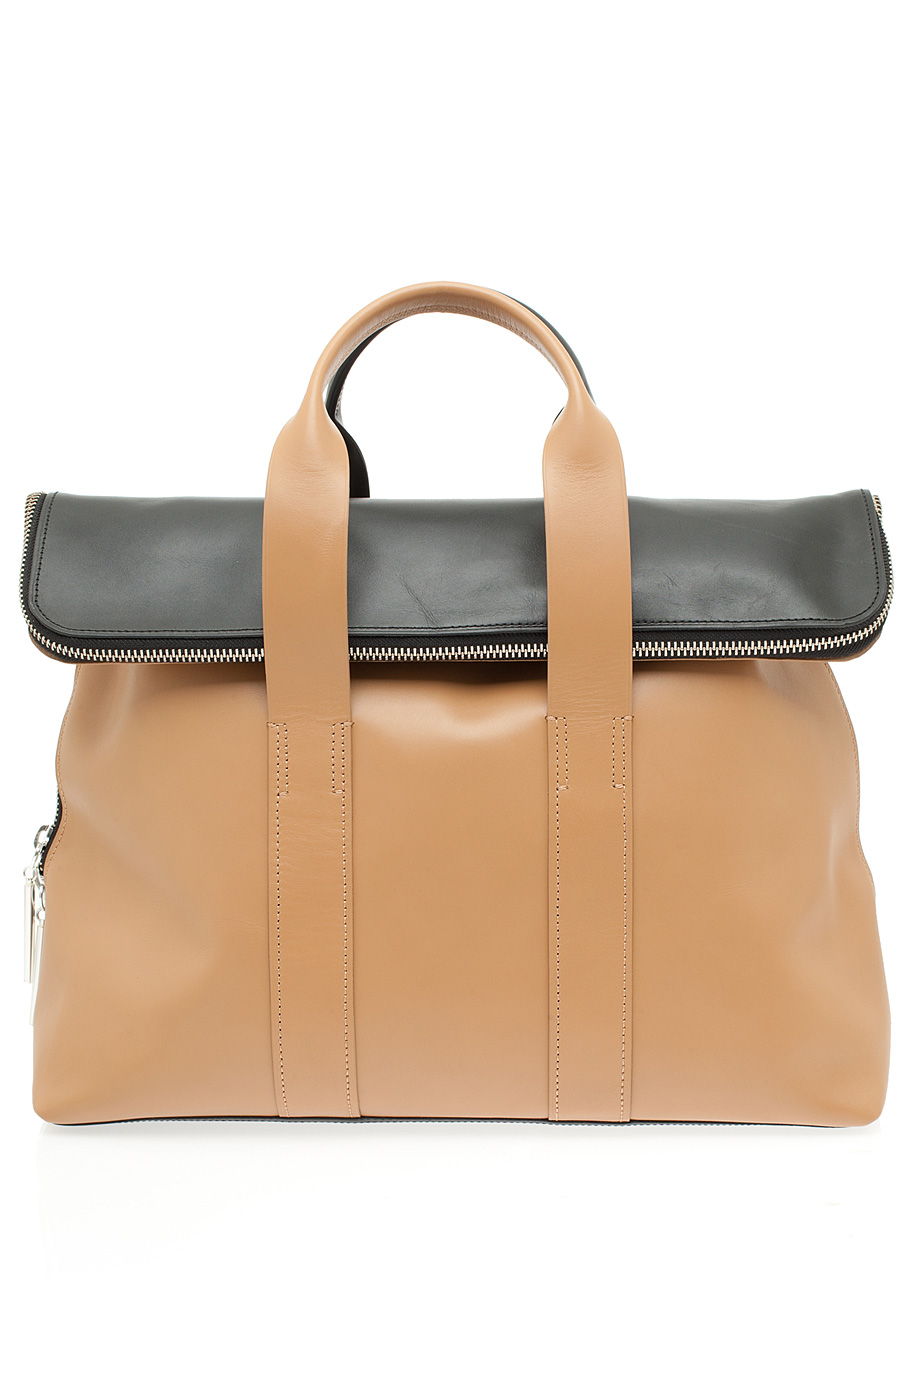 3.1 Phillip Lim 31 Hour Black & Nude Leather Tote Bag at 